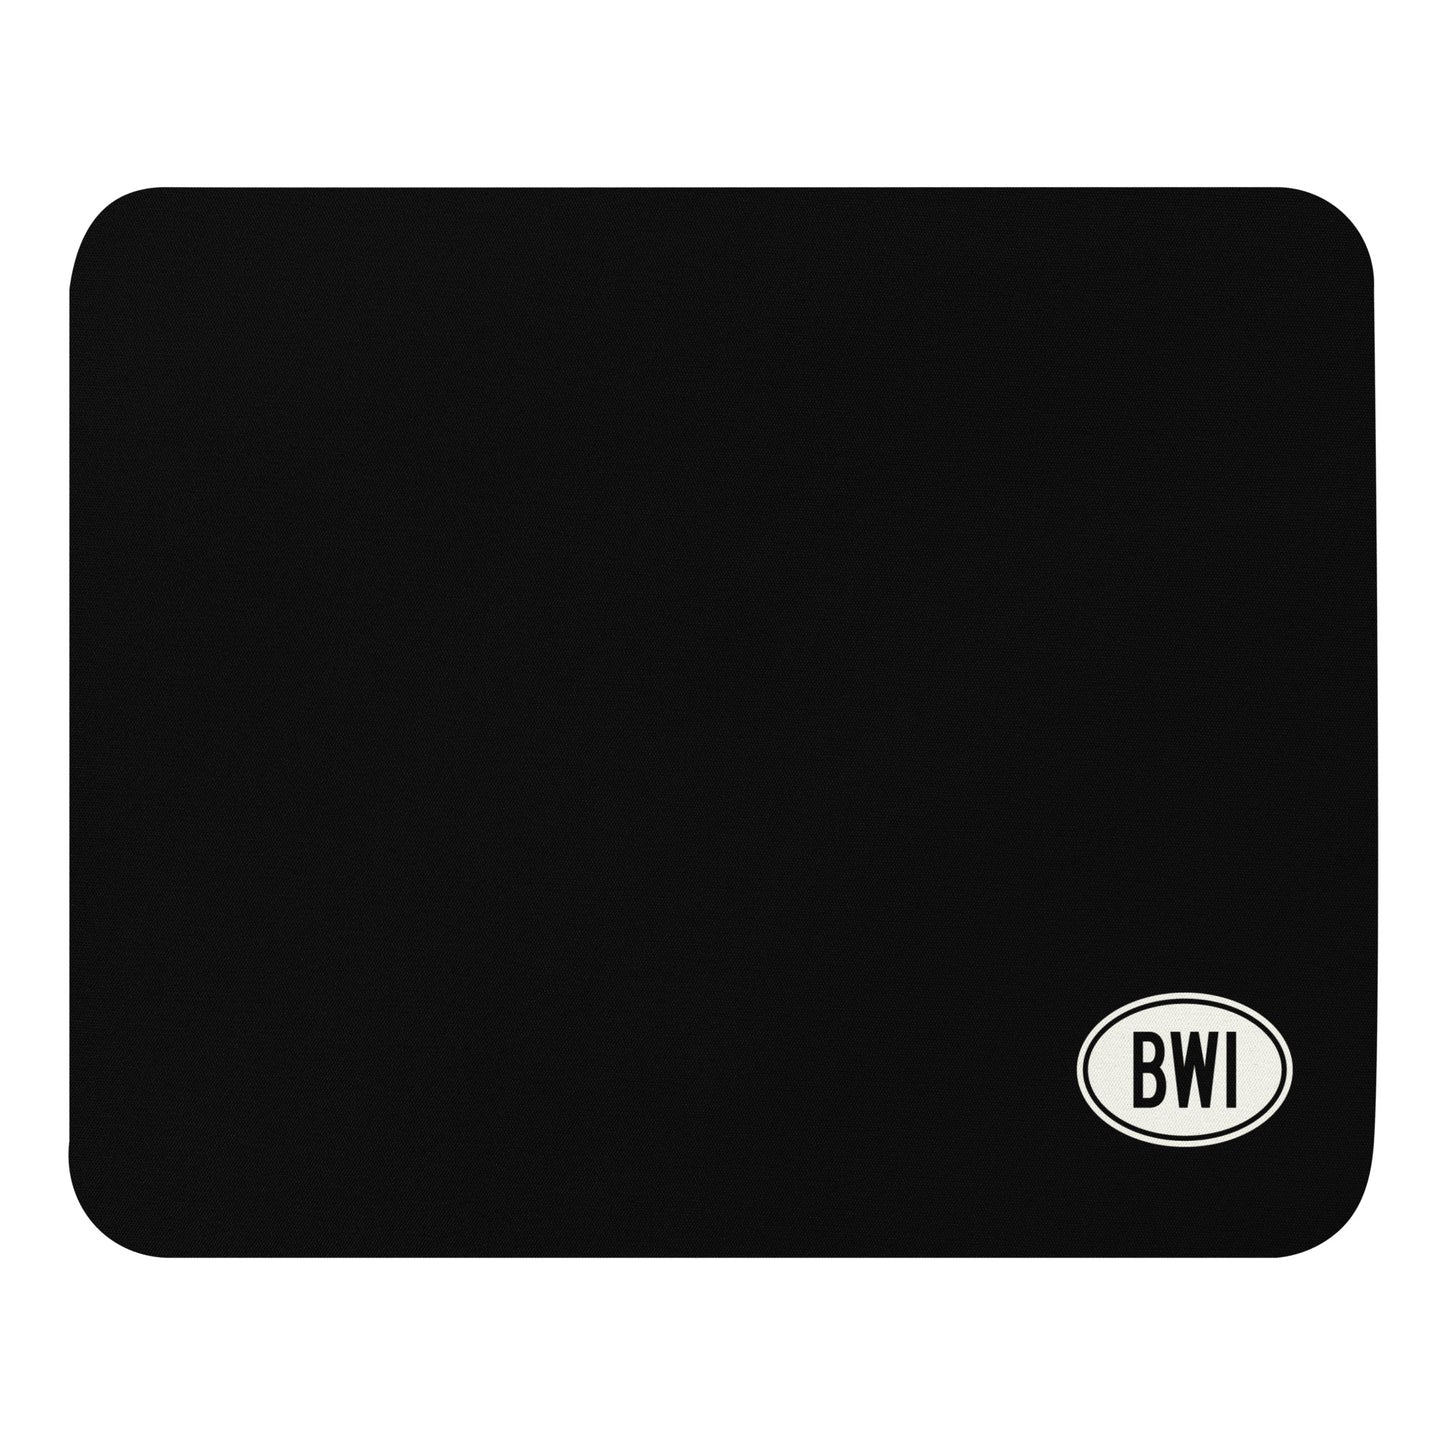 Unique Travel Gift Mouse Pad - White Oval • BWI Baltimore • YHM Designs - Image 01